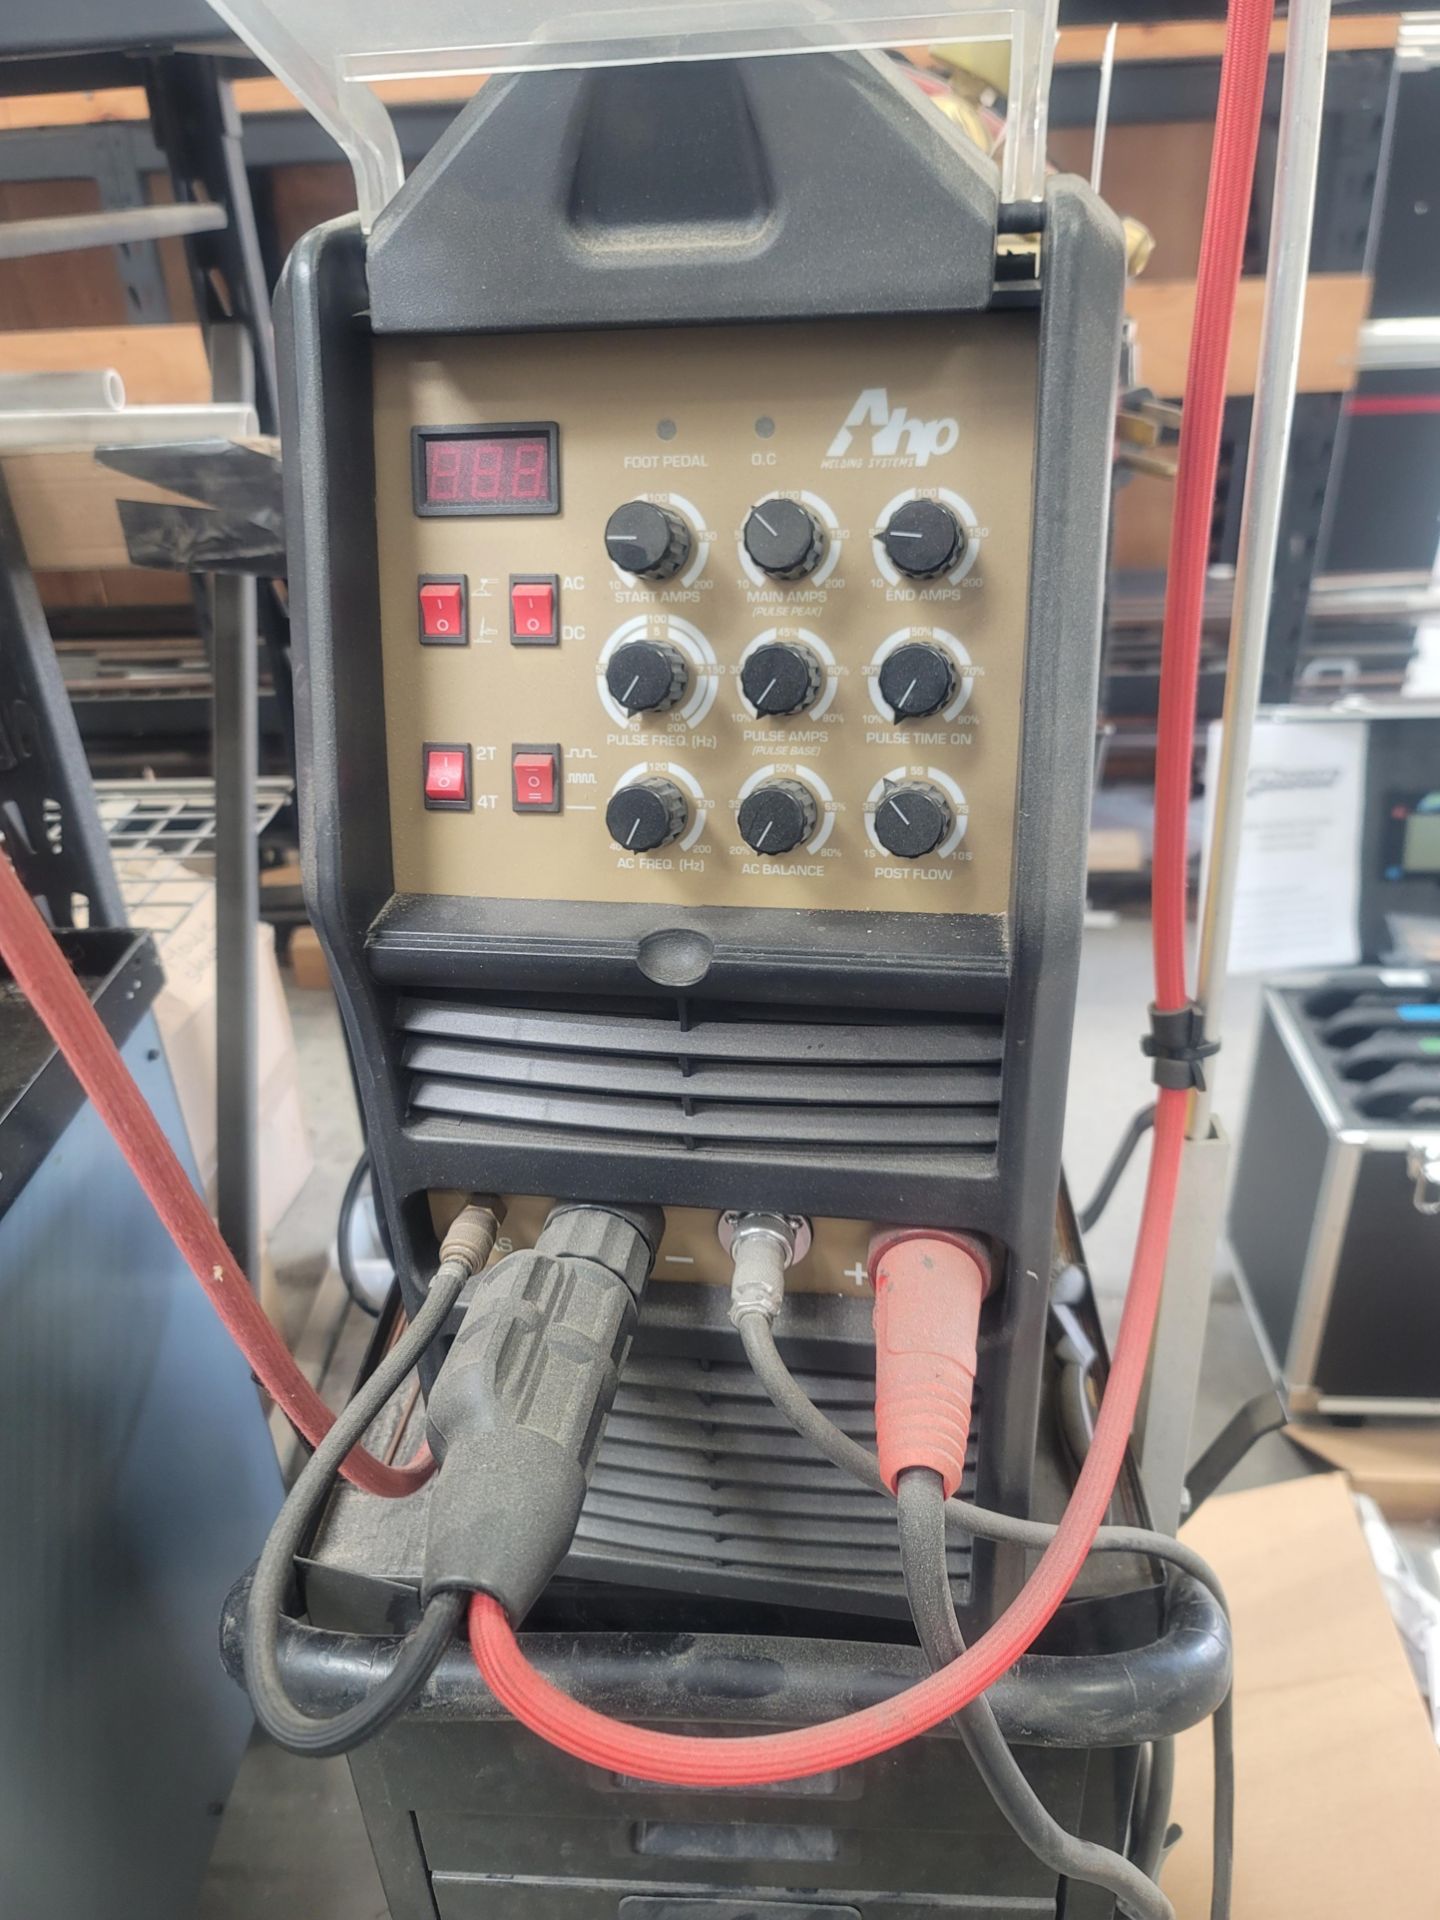 AHP ALPHA-TIG 200X TIG WELDER, W/ CART AND ACCESSORIES, S/N 31604220254 - Image 2 of 5